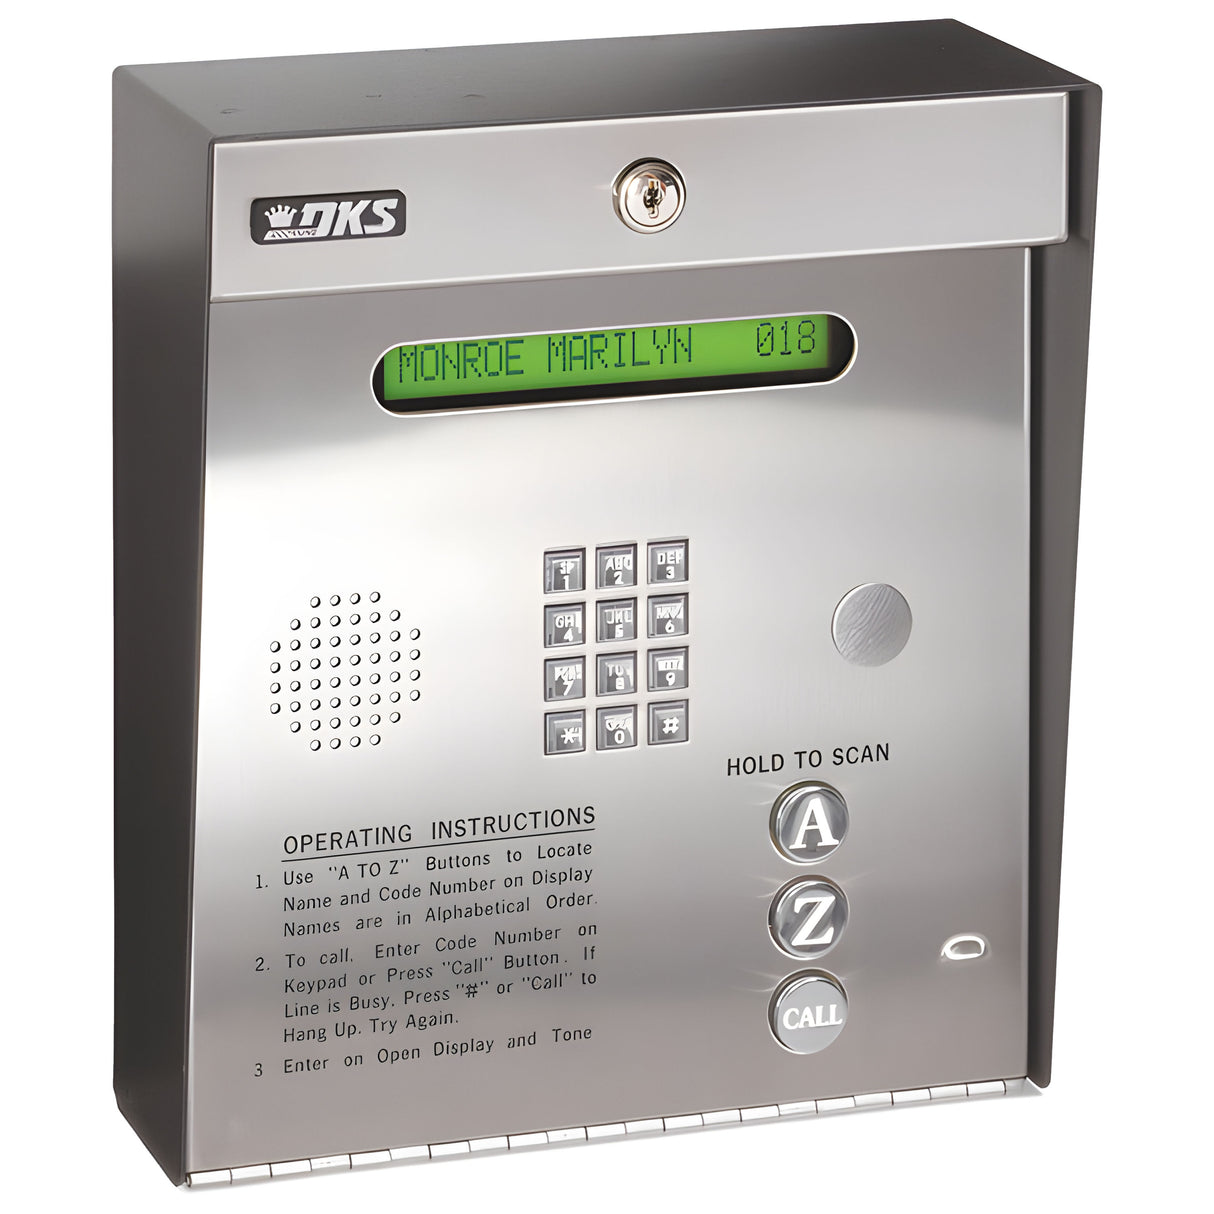 Doorking 1835-080 Telephone Entry System (Limited Time Sale)